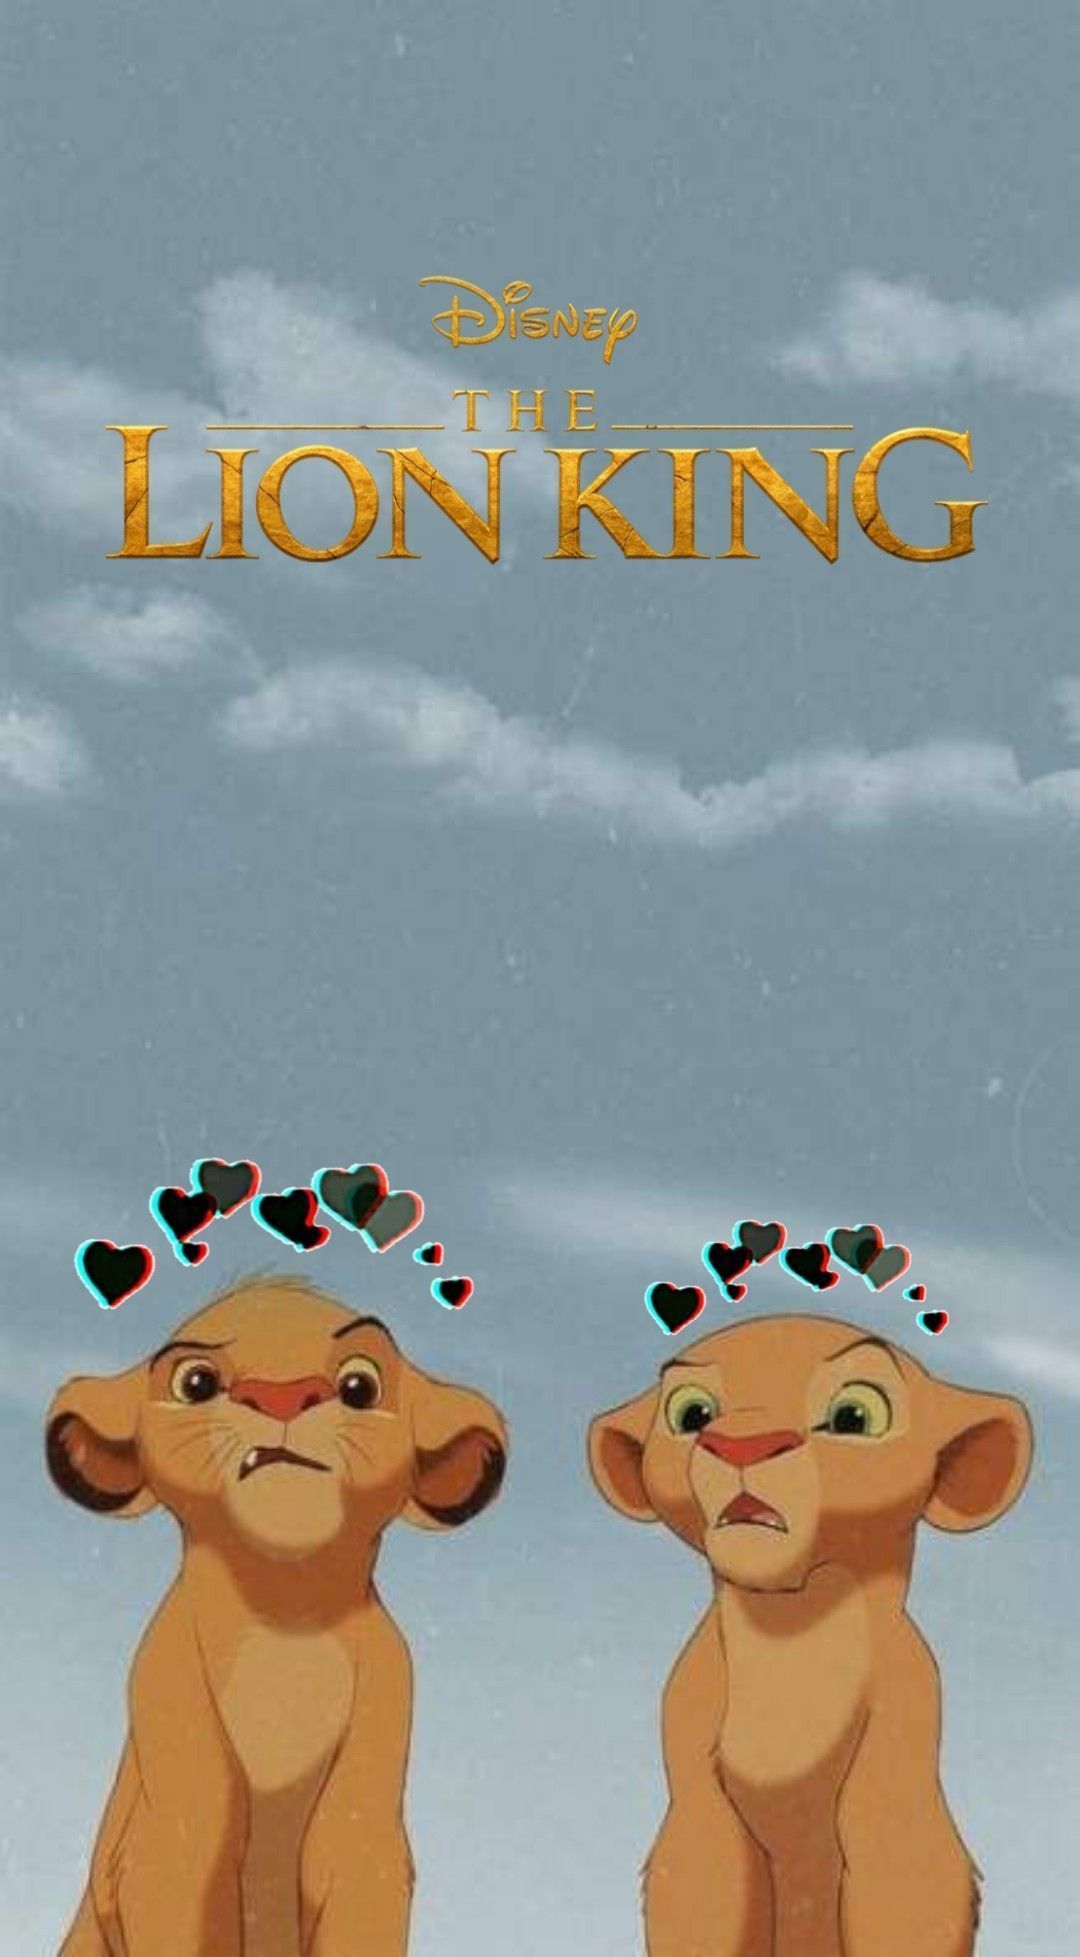 The lion king poster with two cute cubs - The Lion King